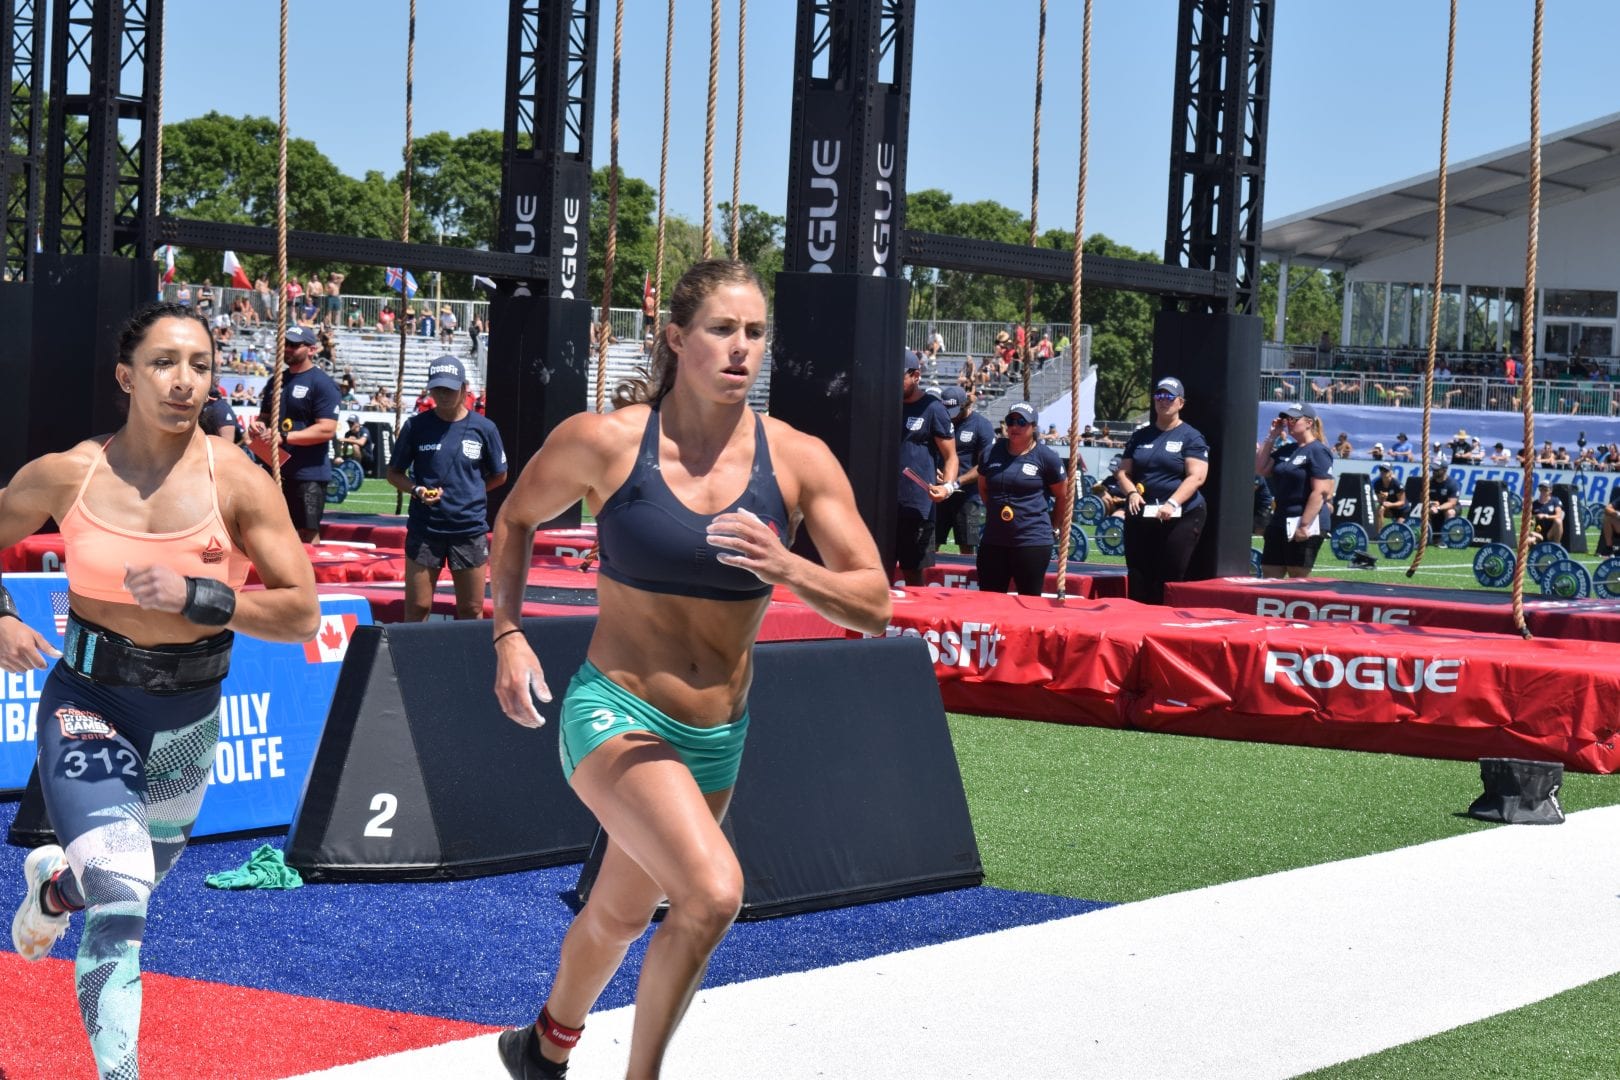 Rachel Garibay takes a lap between rounds of legless rope climbs at the 2019 CrossFit Games